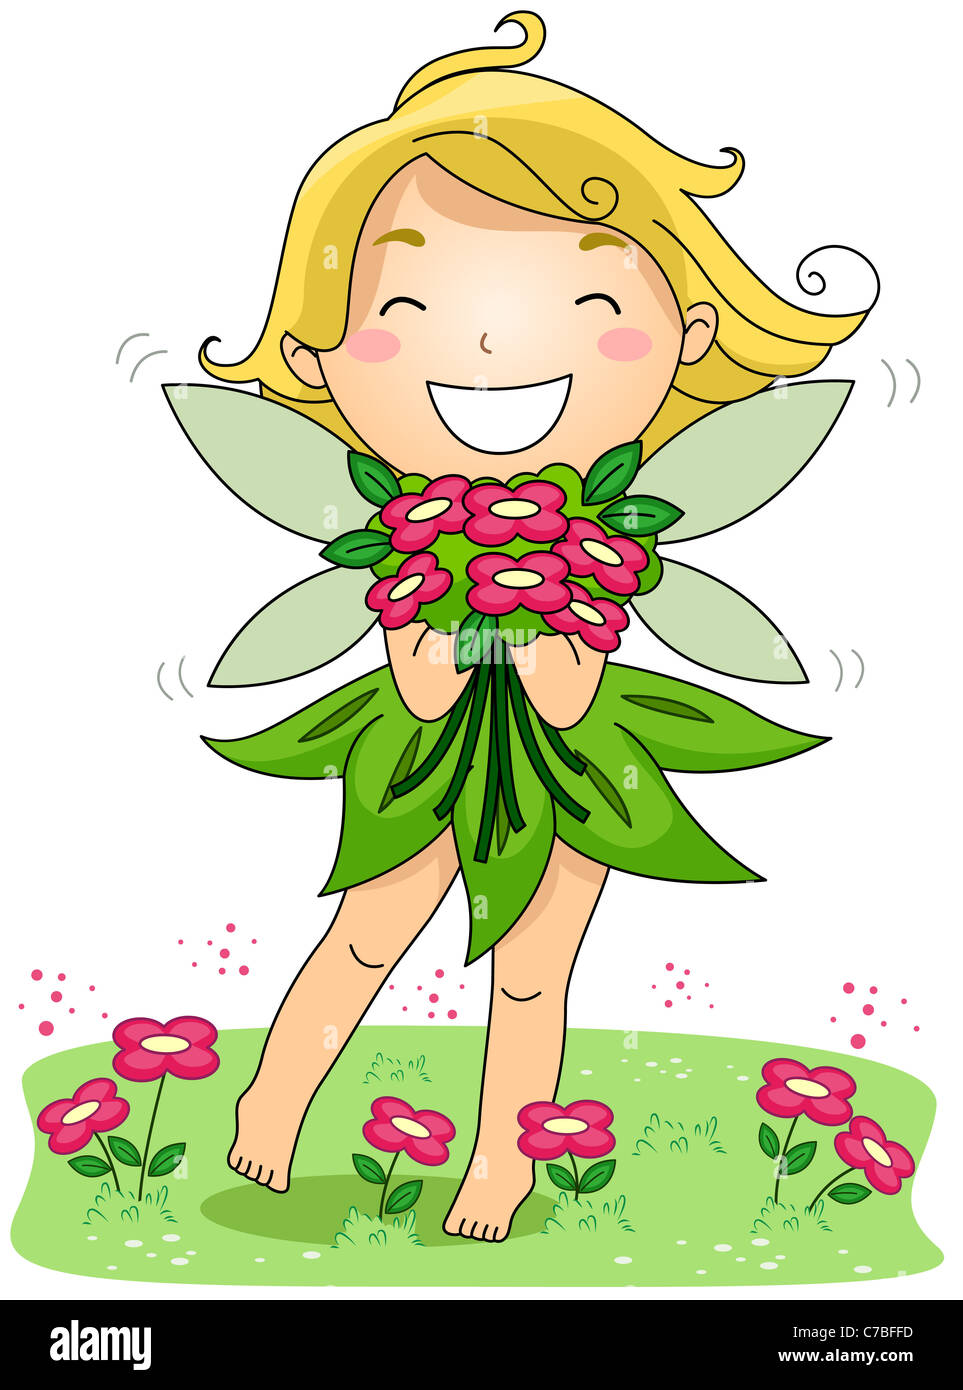 Illustration of a Spring Fairy Holding a Bunch of Flowers Stock Photo